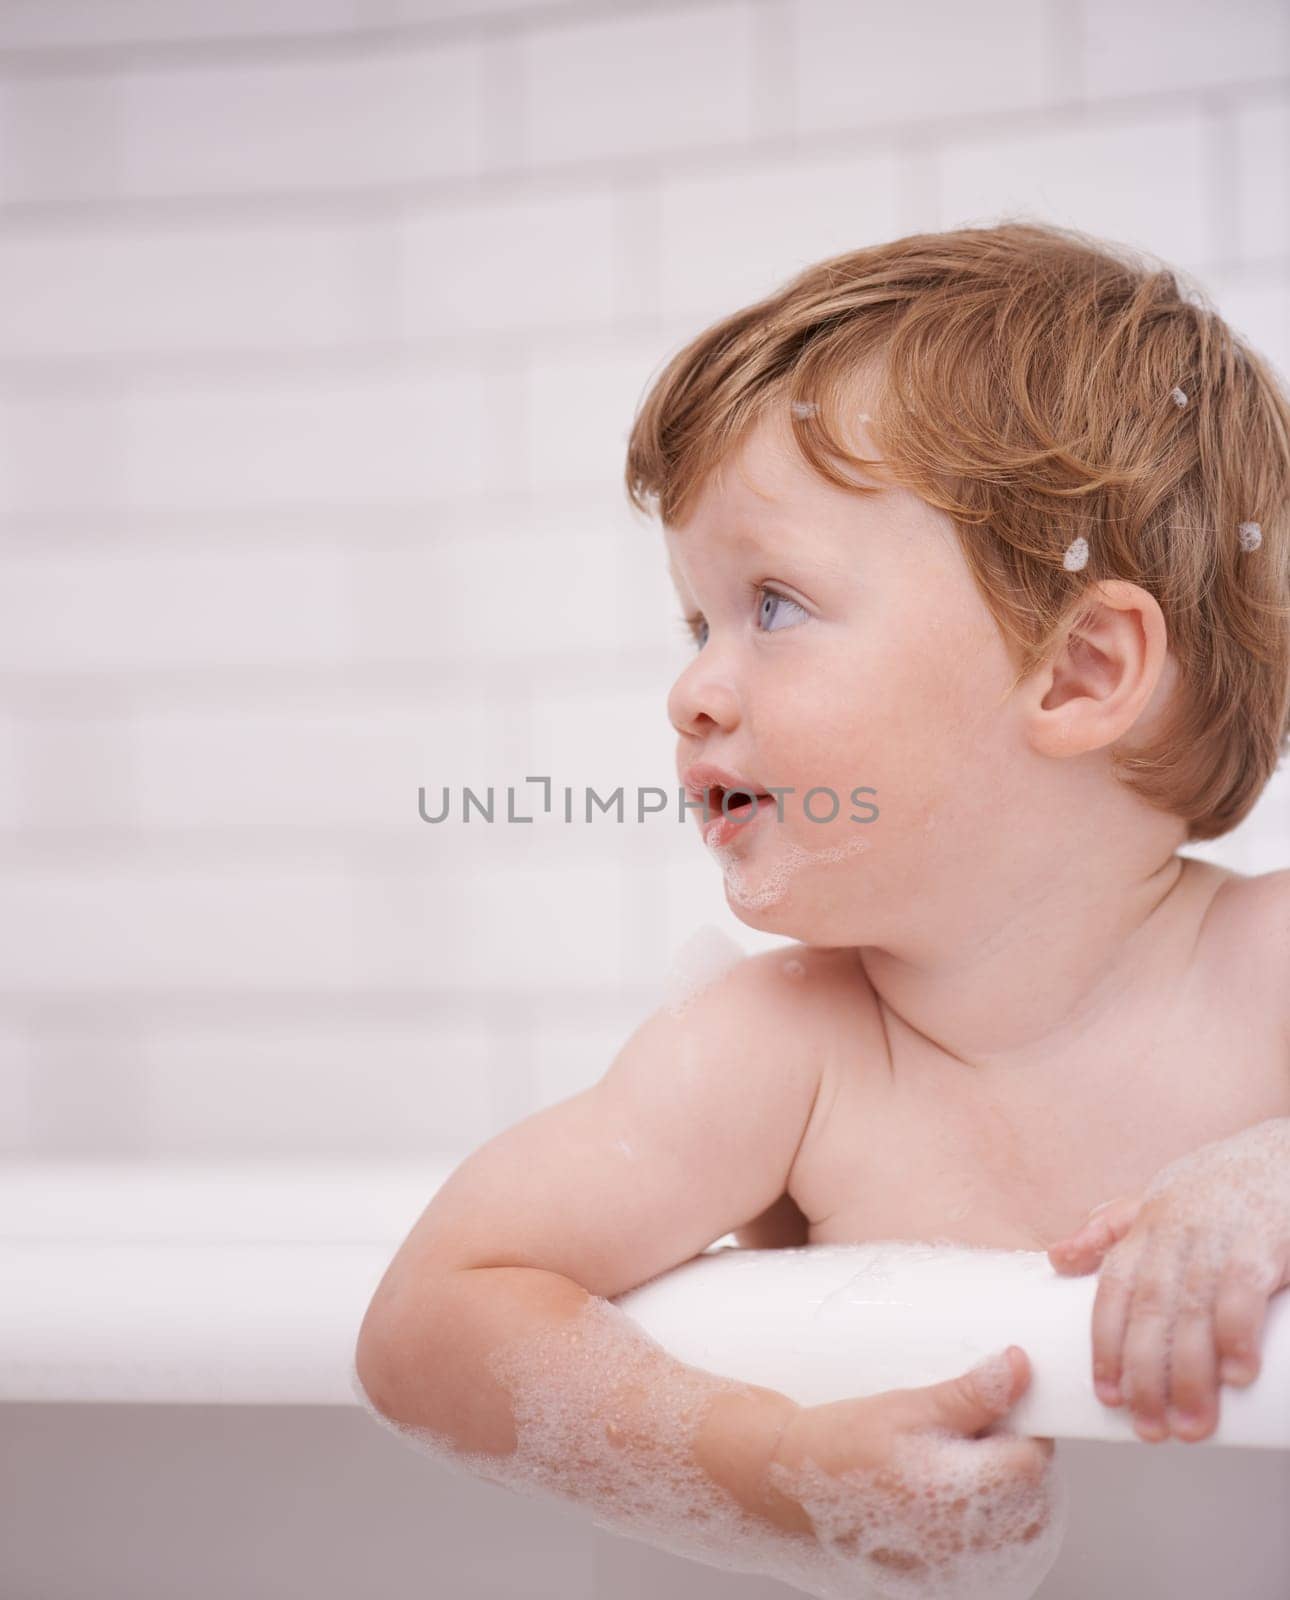 Toddler in bathtub, cleaning with bubbles and soap for morning routine with health, wellness and body care. Male baby washing in foam with hygiene or boy child thinking in water to relax in bathroom.